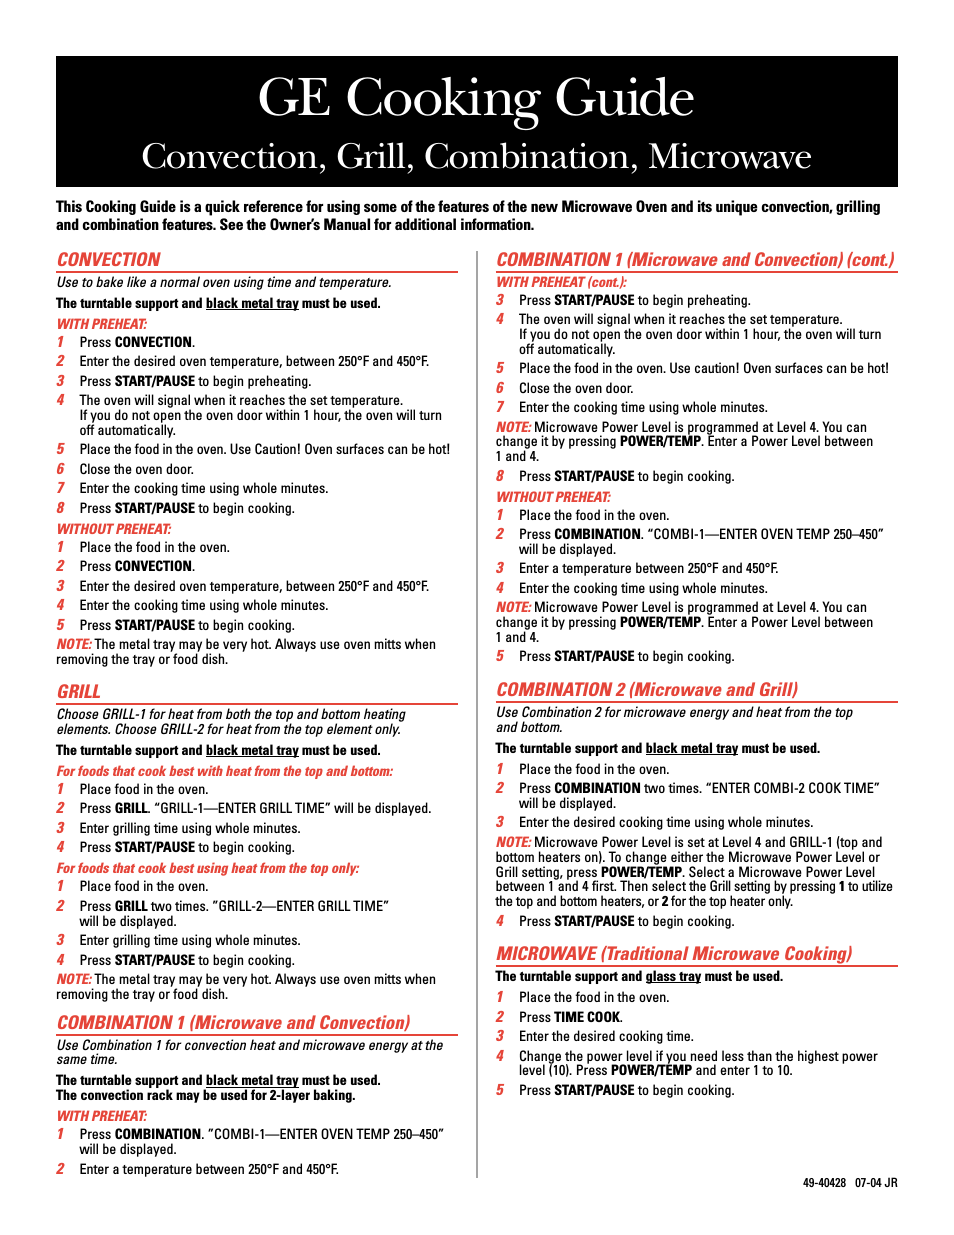 Convection Grill Combination Microwave Cooking Guide